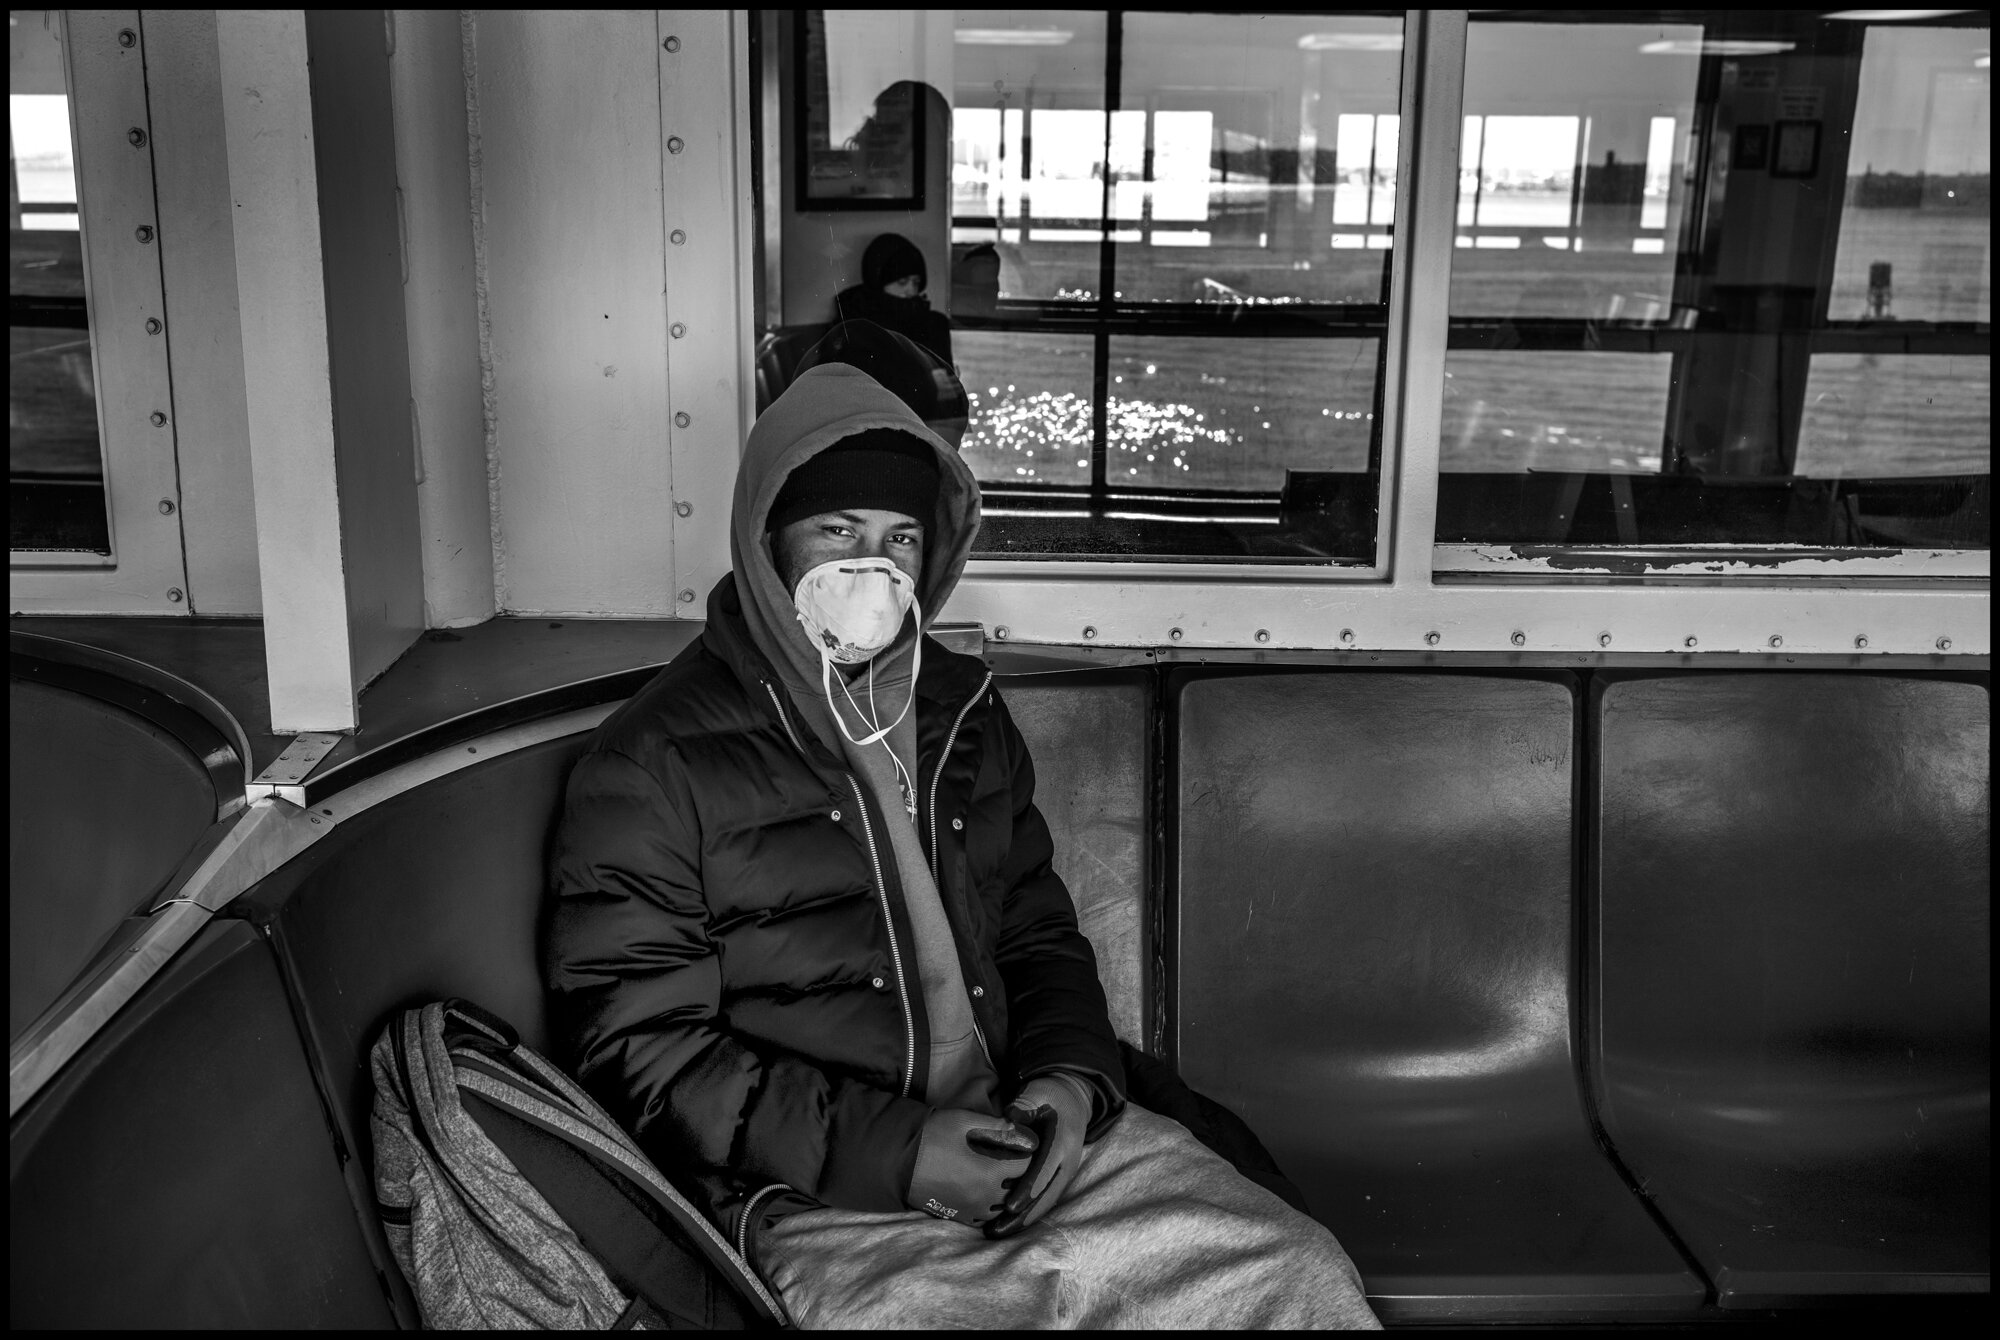  A young man takes the Staten Island Ferry towards Manhattan.  March 24, 2020. © Peter Turnley  ID#&nbsp;14-007 